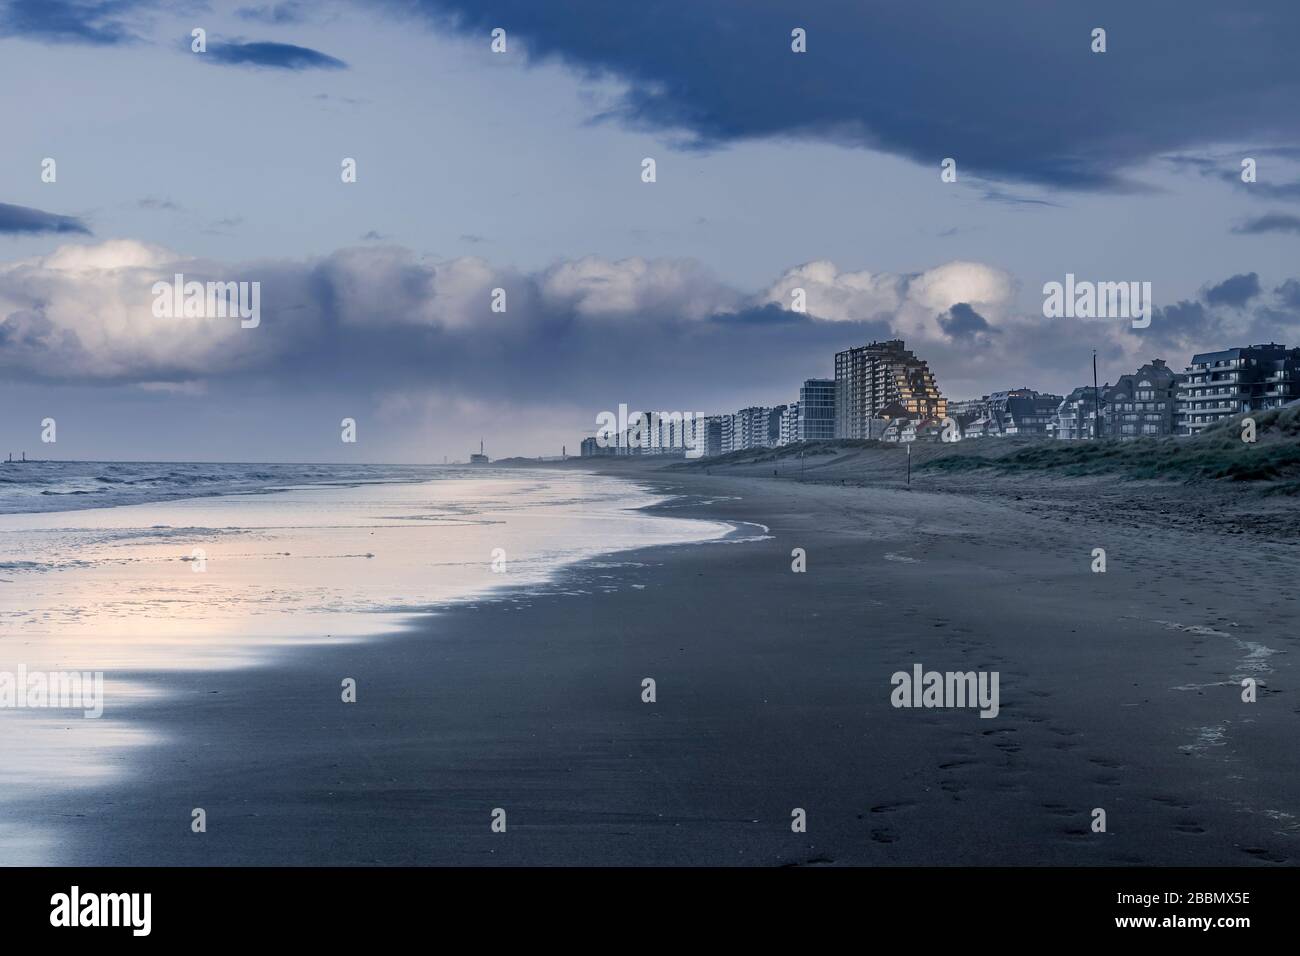 Nieuwpoort, Belgium - November 29, 2019: The beach during blue hour. Muted colors. Stock Photo